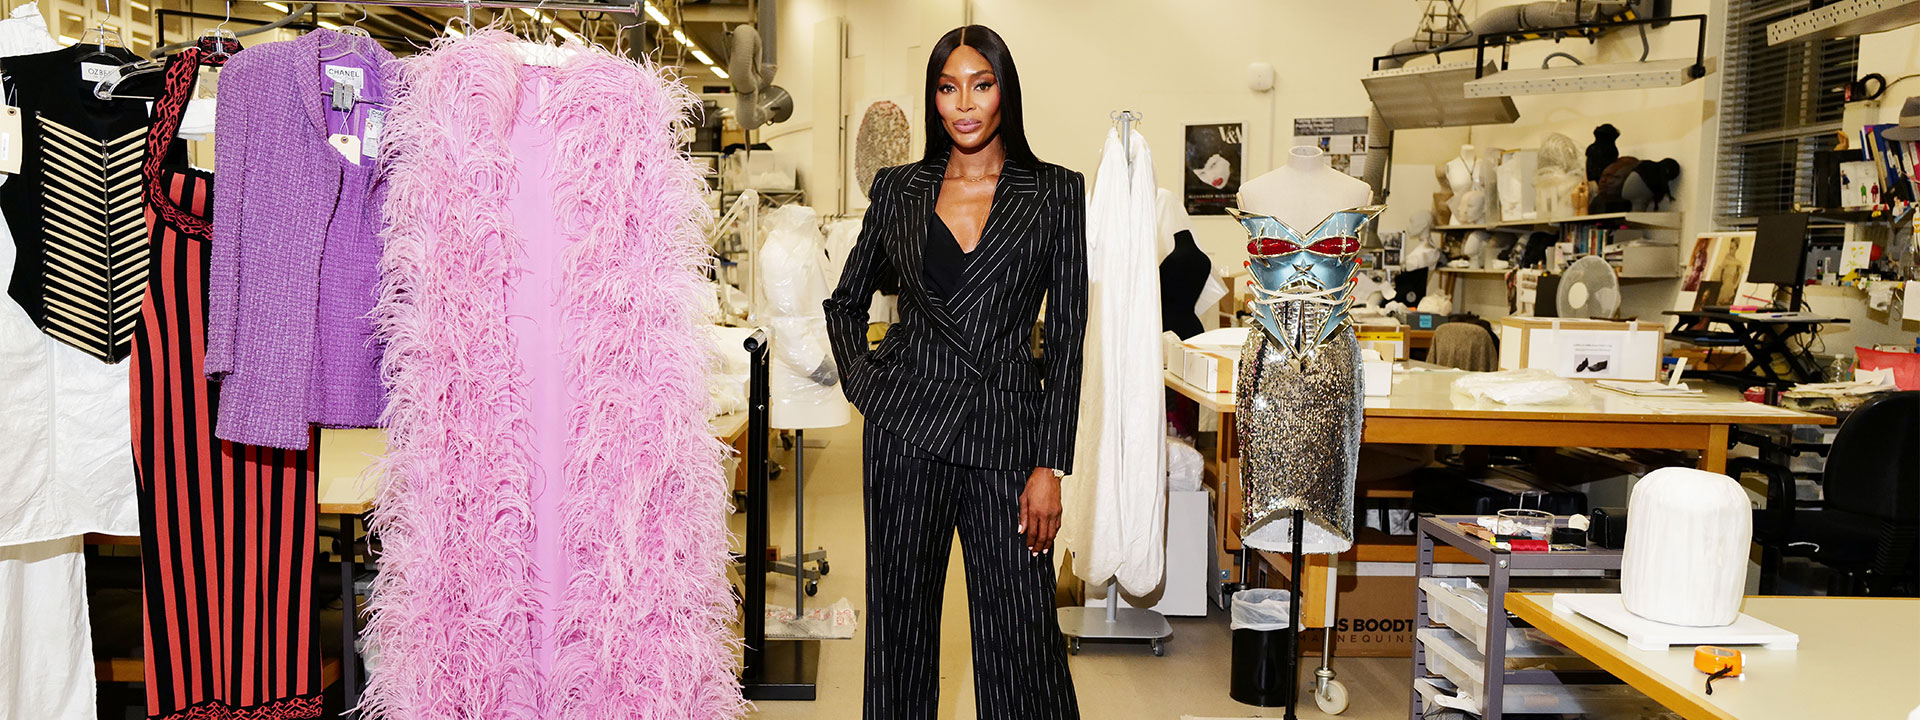 Naomi in black pin striped suit in atelier with dresses